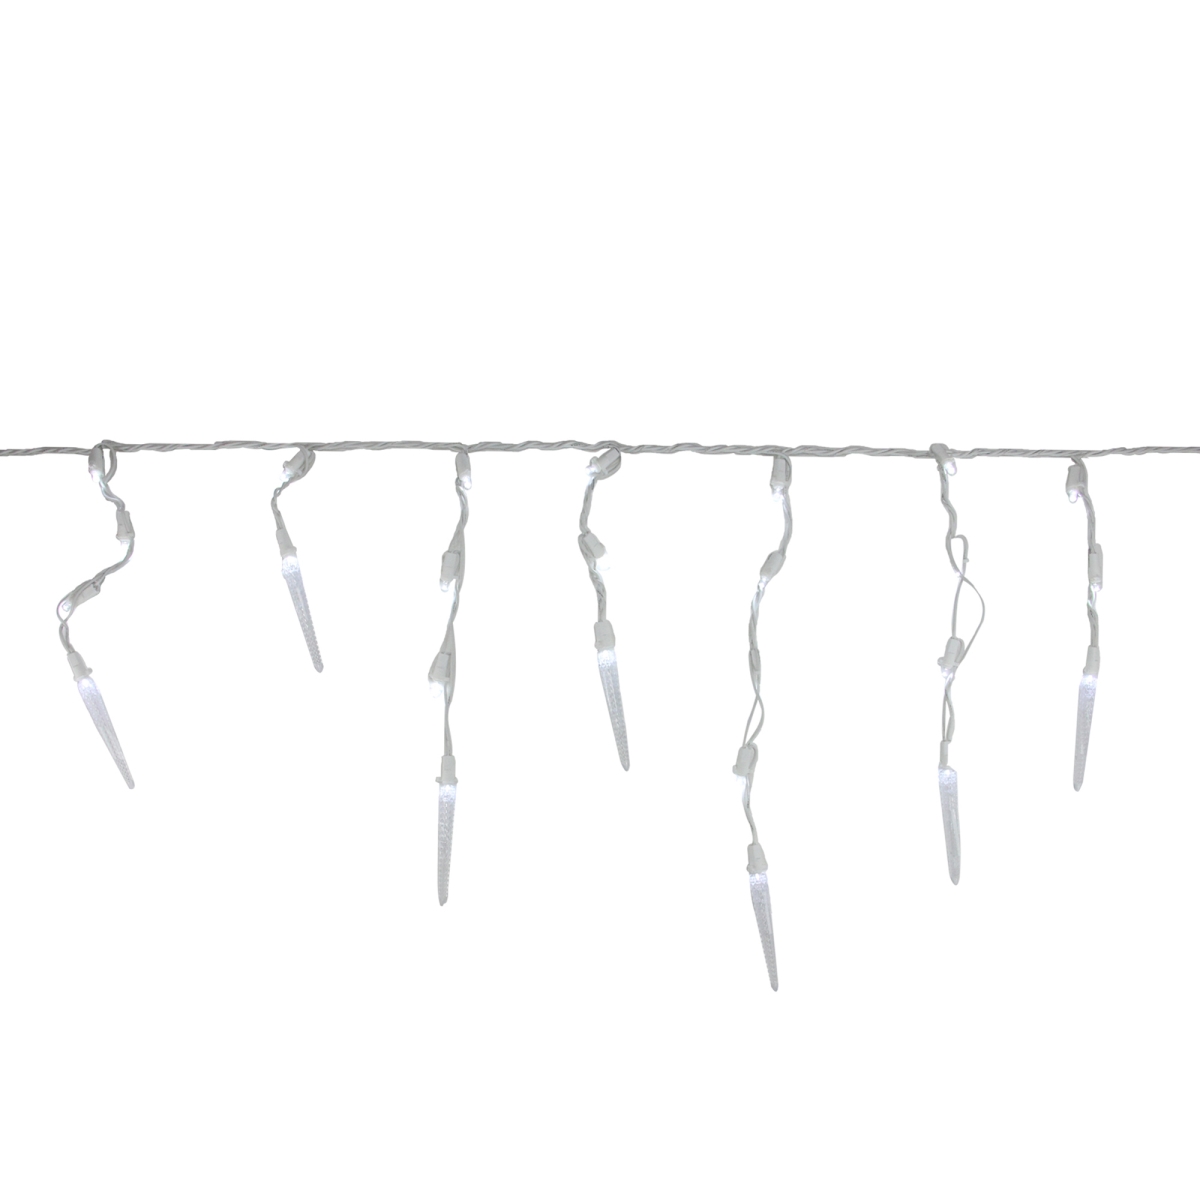 Picture of Brite Star 32735106 5.75 ft. White Wire & LED Icicle Mini Christmas Lights - 60 Count